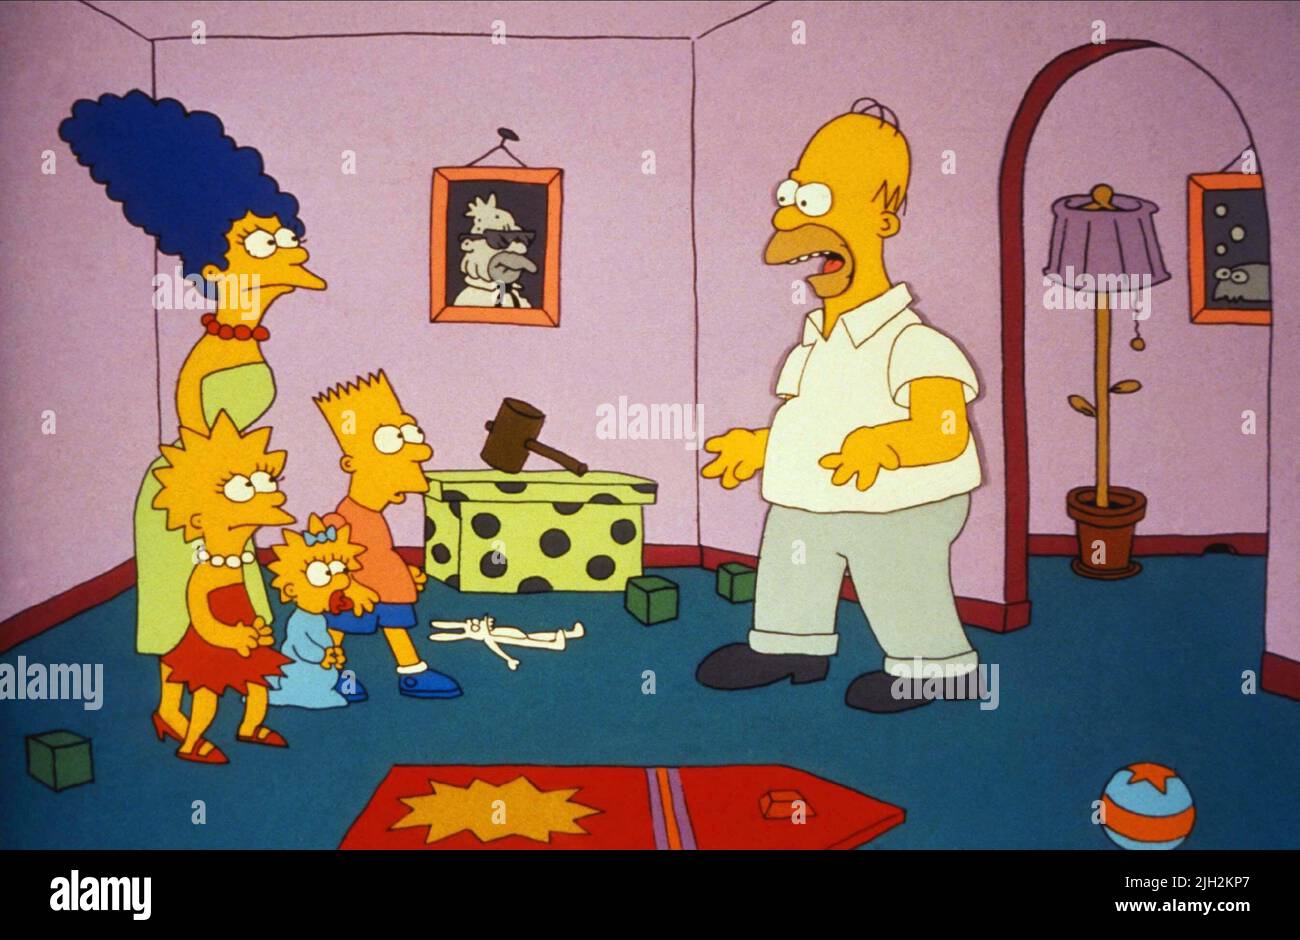 LISA,MARGE,MAGGIE,BART,SIMPSON, THE SIMPSONS, 1989 Stock Photo